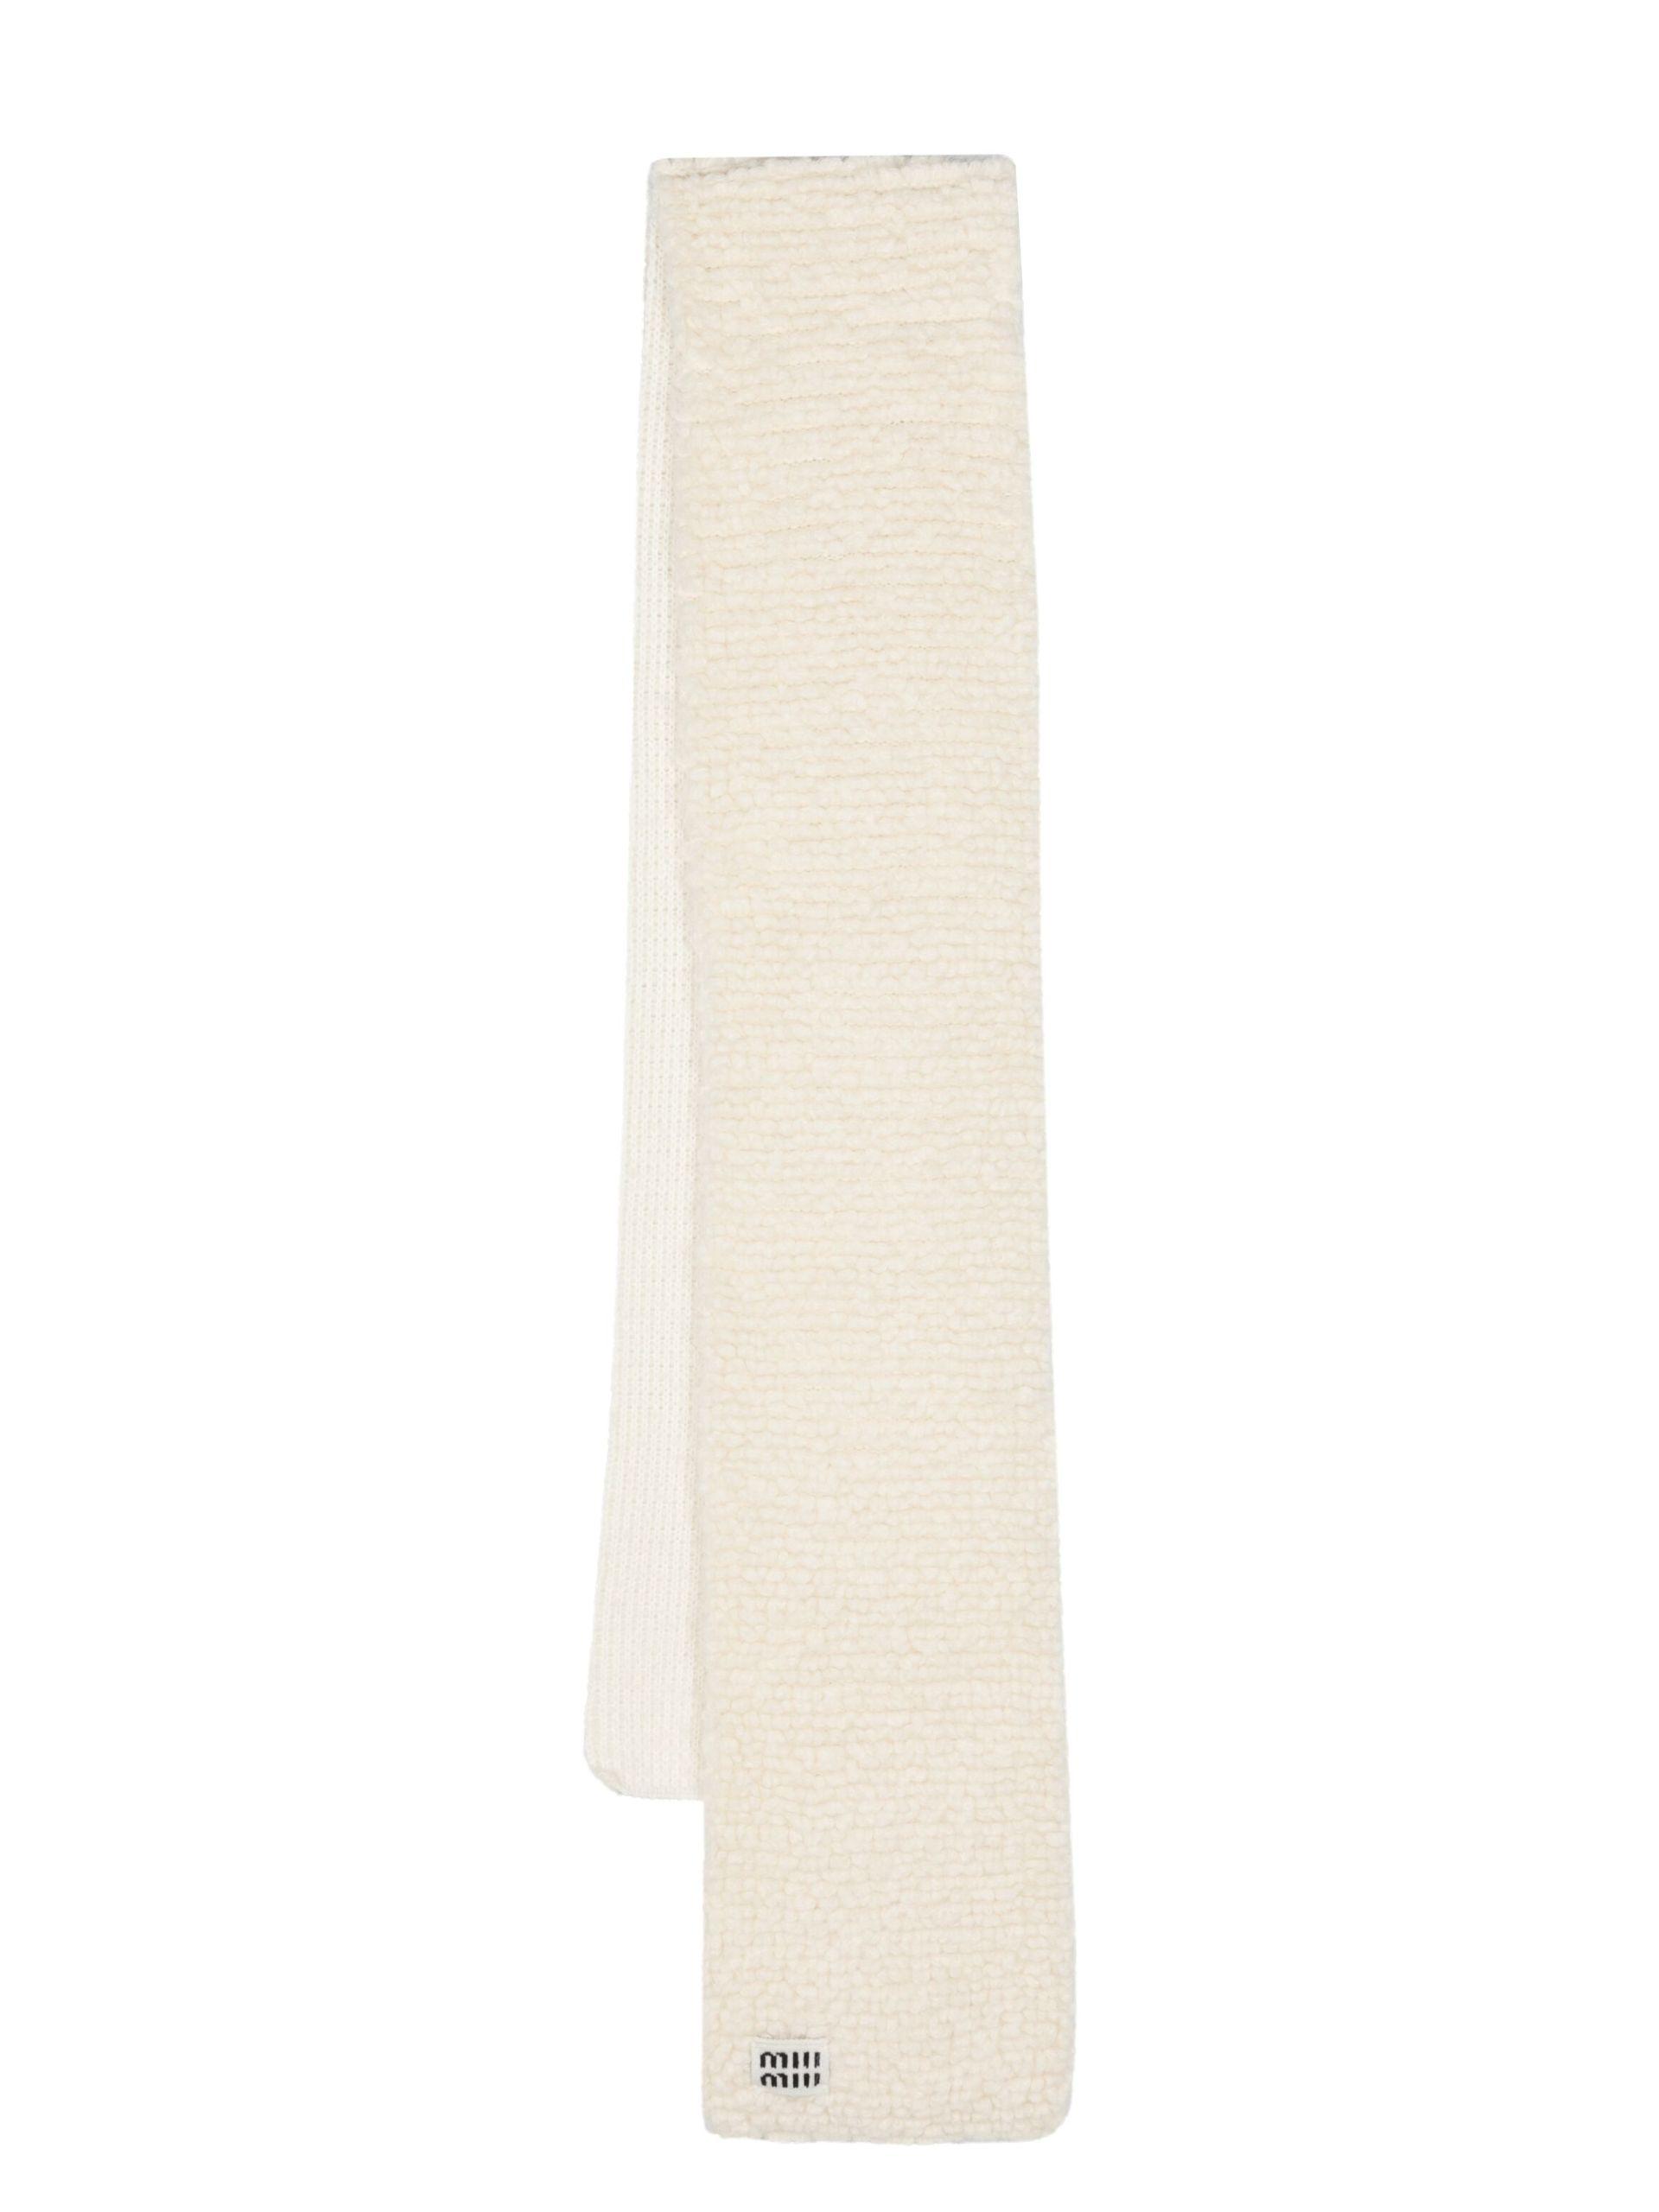 Miu Miu Women's Cashmere Scarf with Feathers - White - Scarves